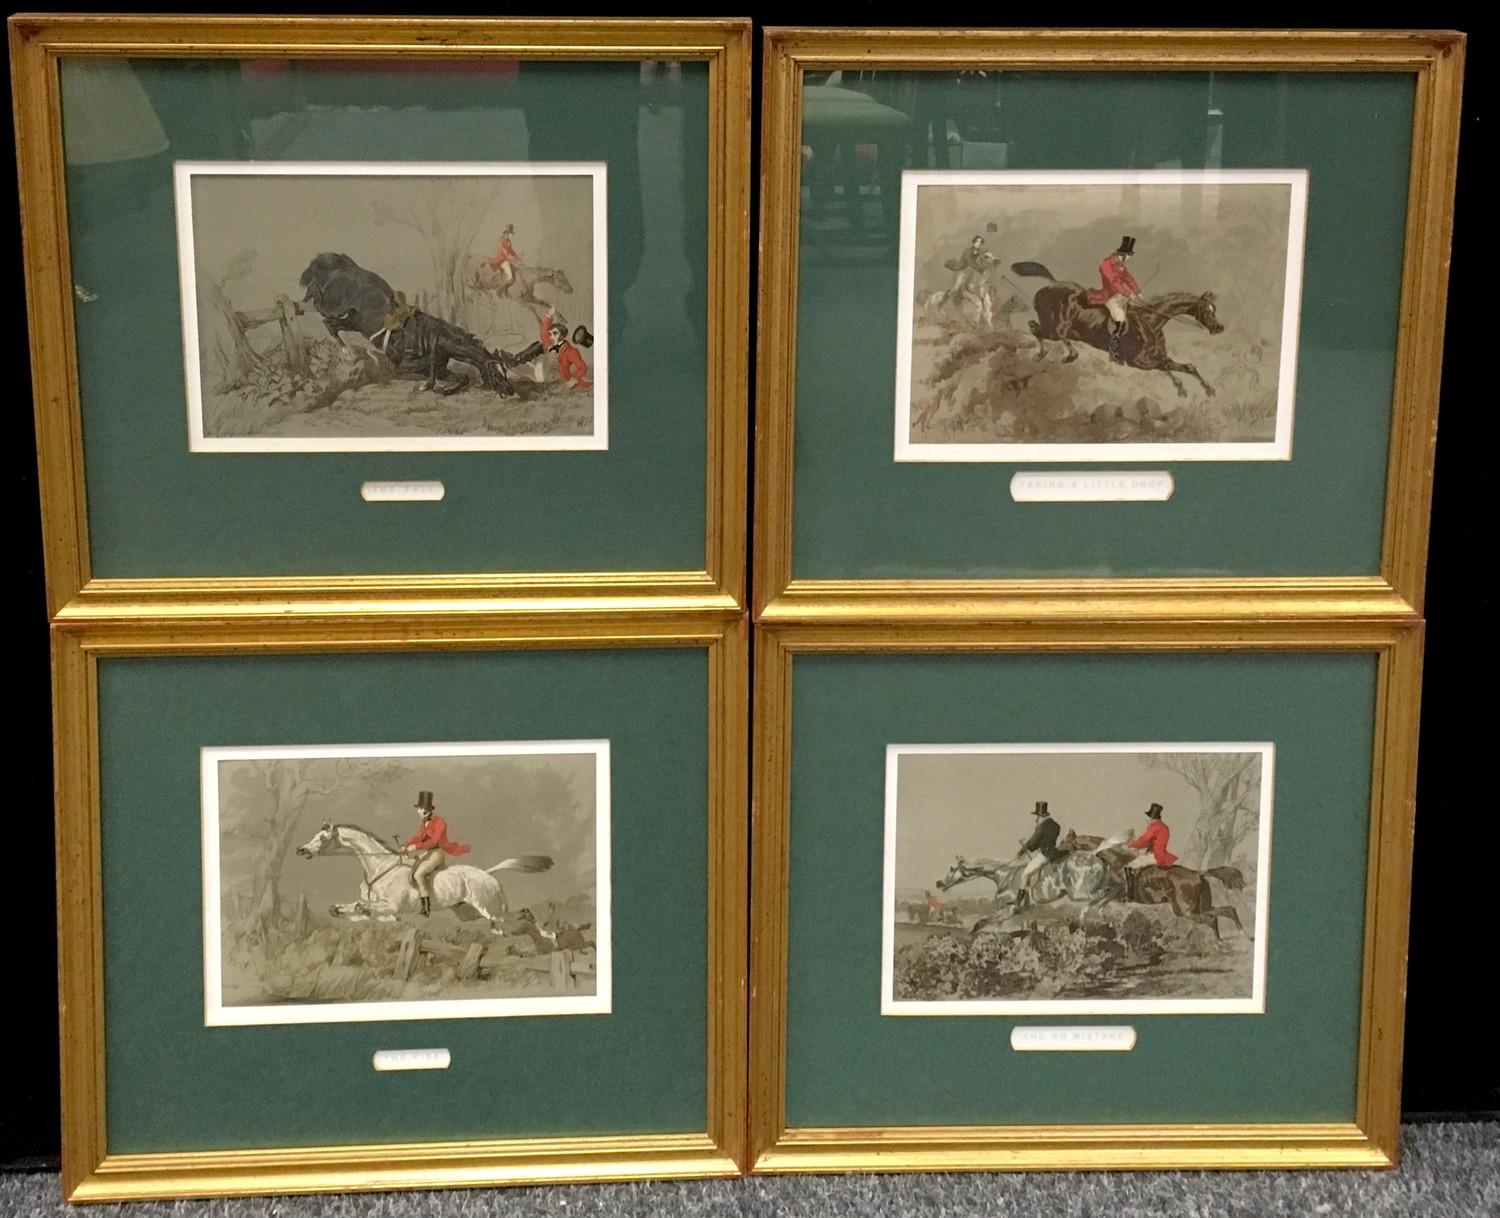 F Herring, a set of four chromolithographs - The Rise, The Fall, And No Mistake, Takinf A Little